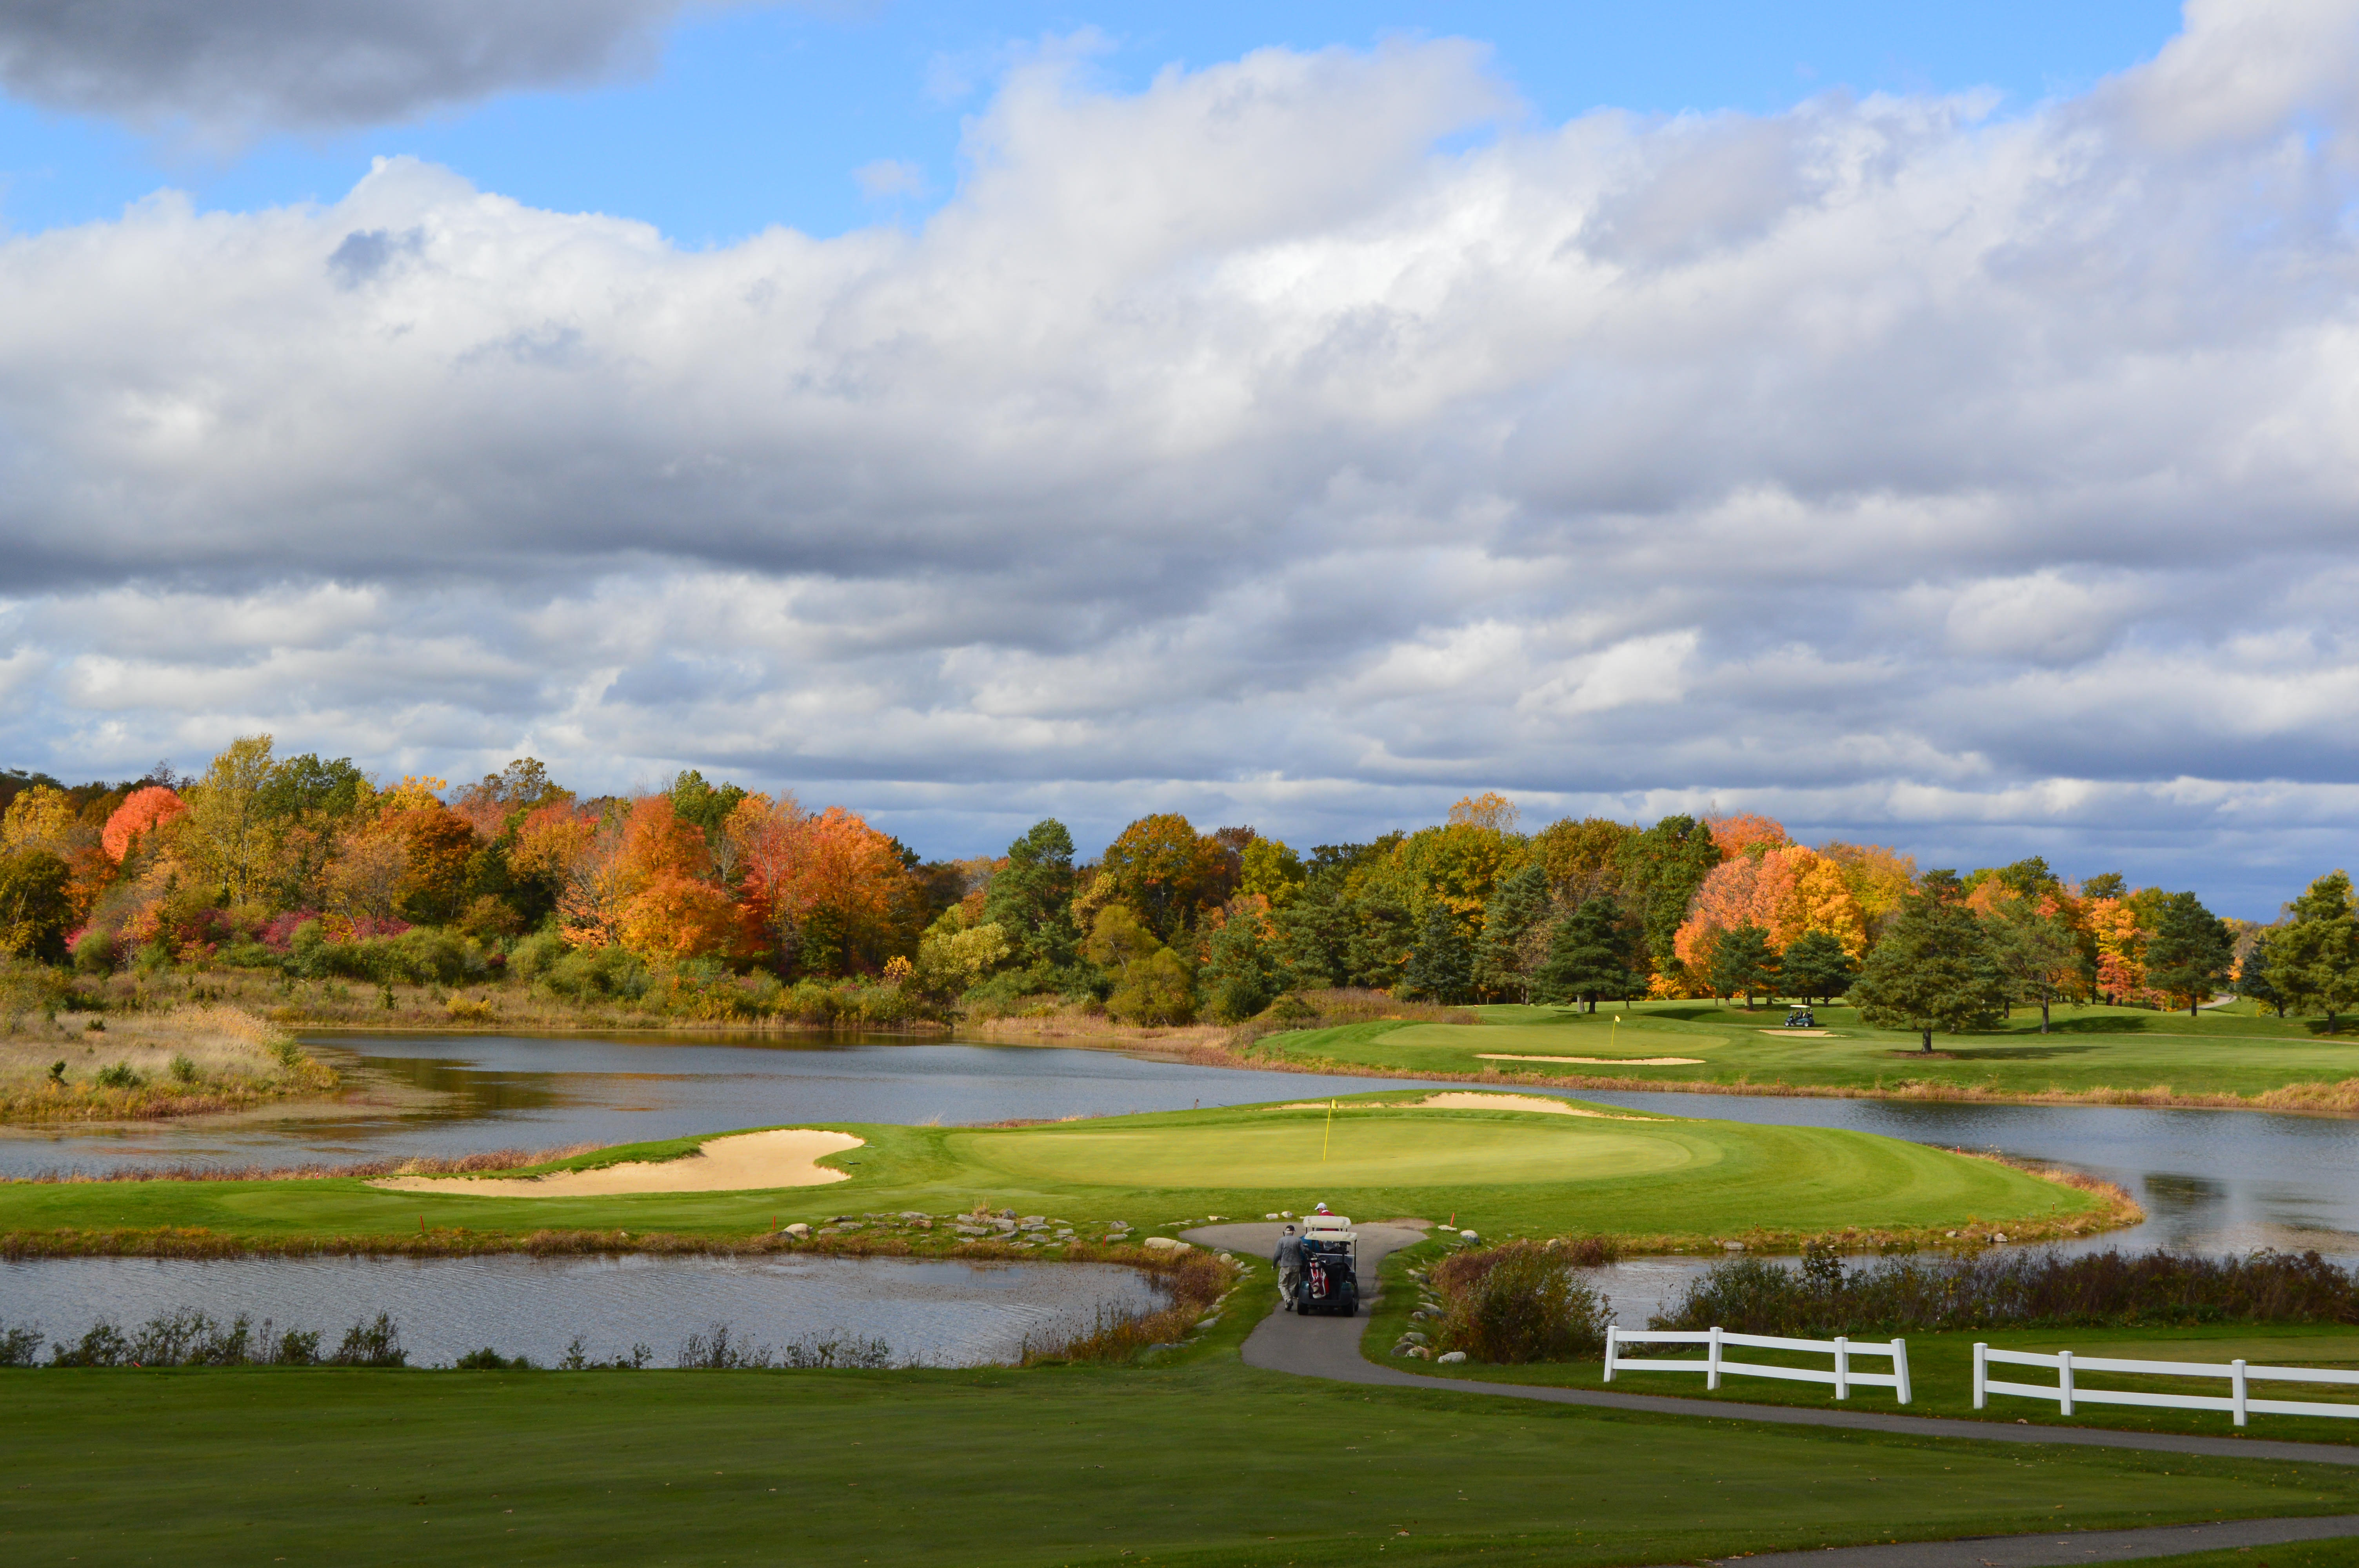 Golf Course In Fall